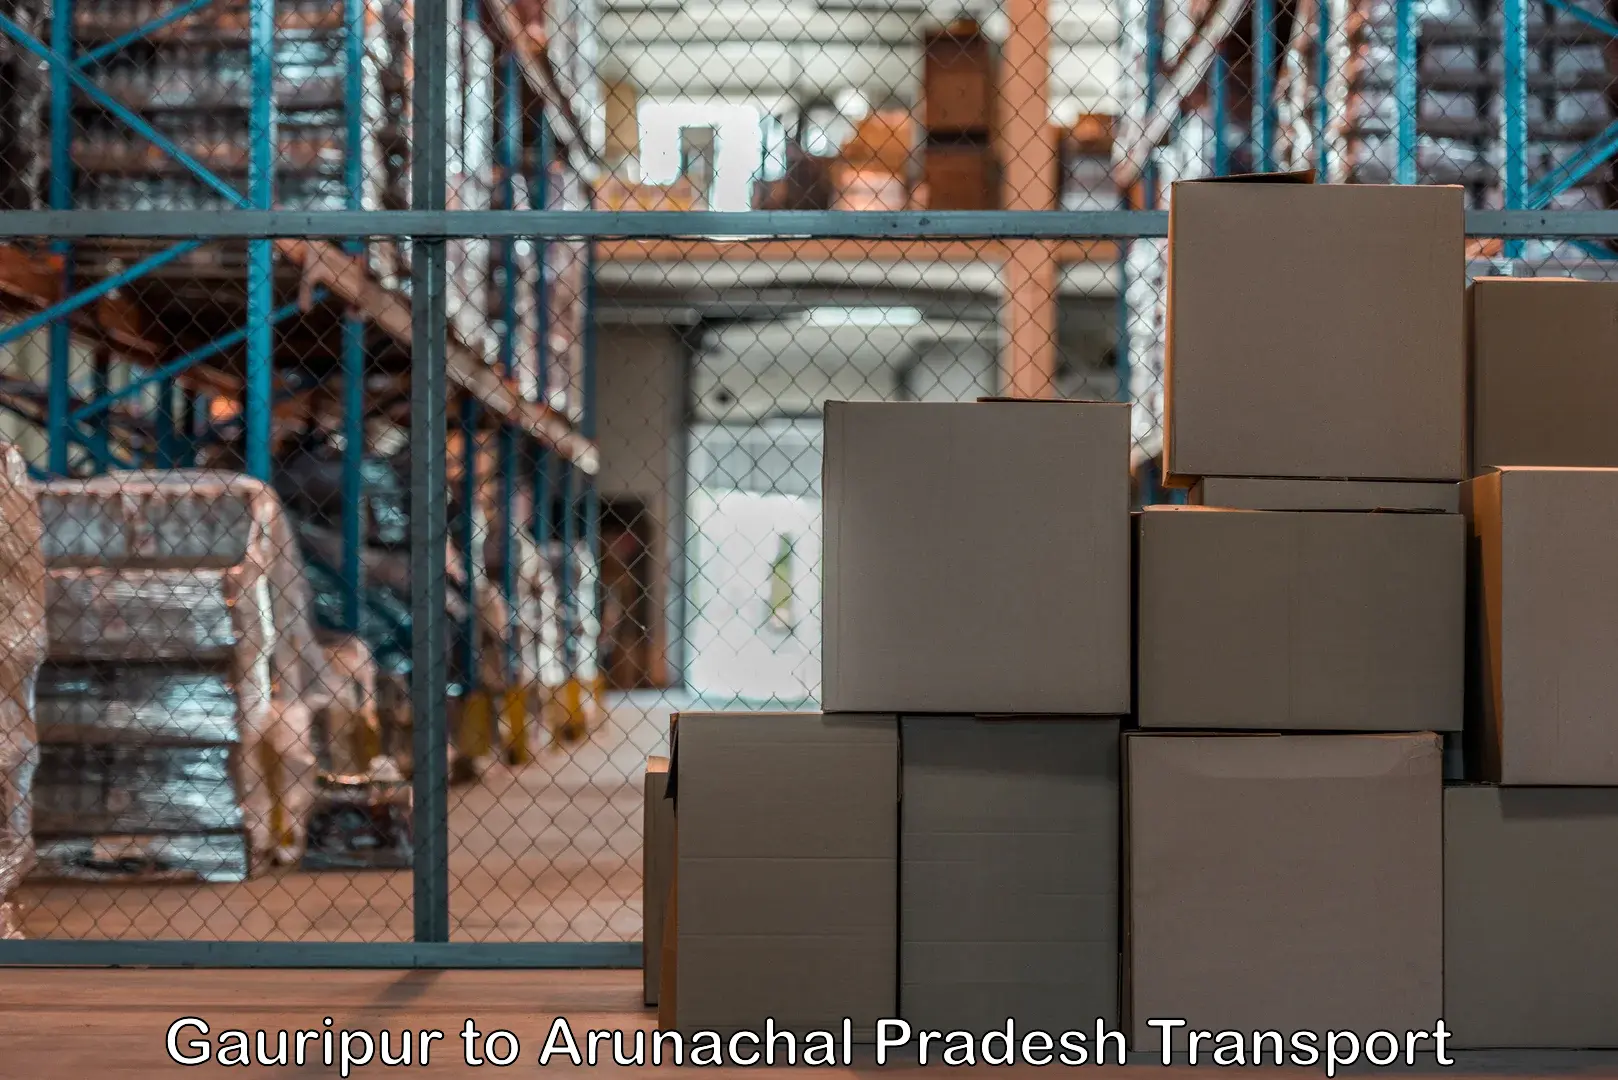 Truck transport companies in India Gauripur to Changlang